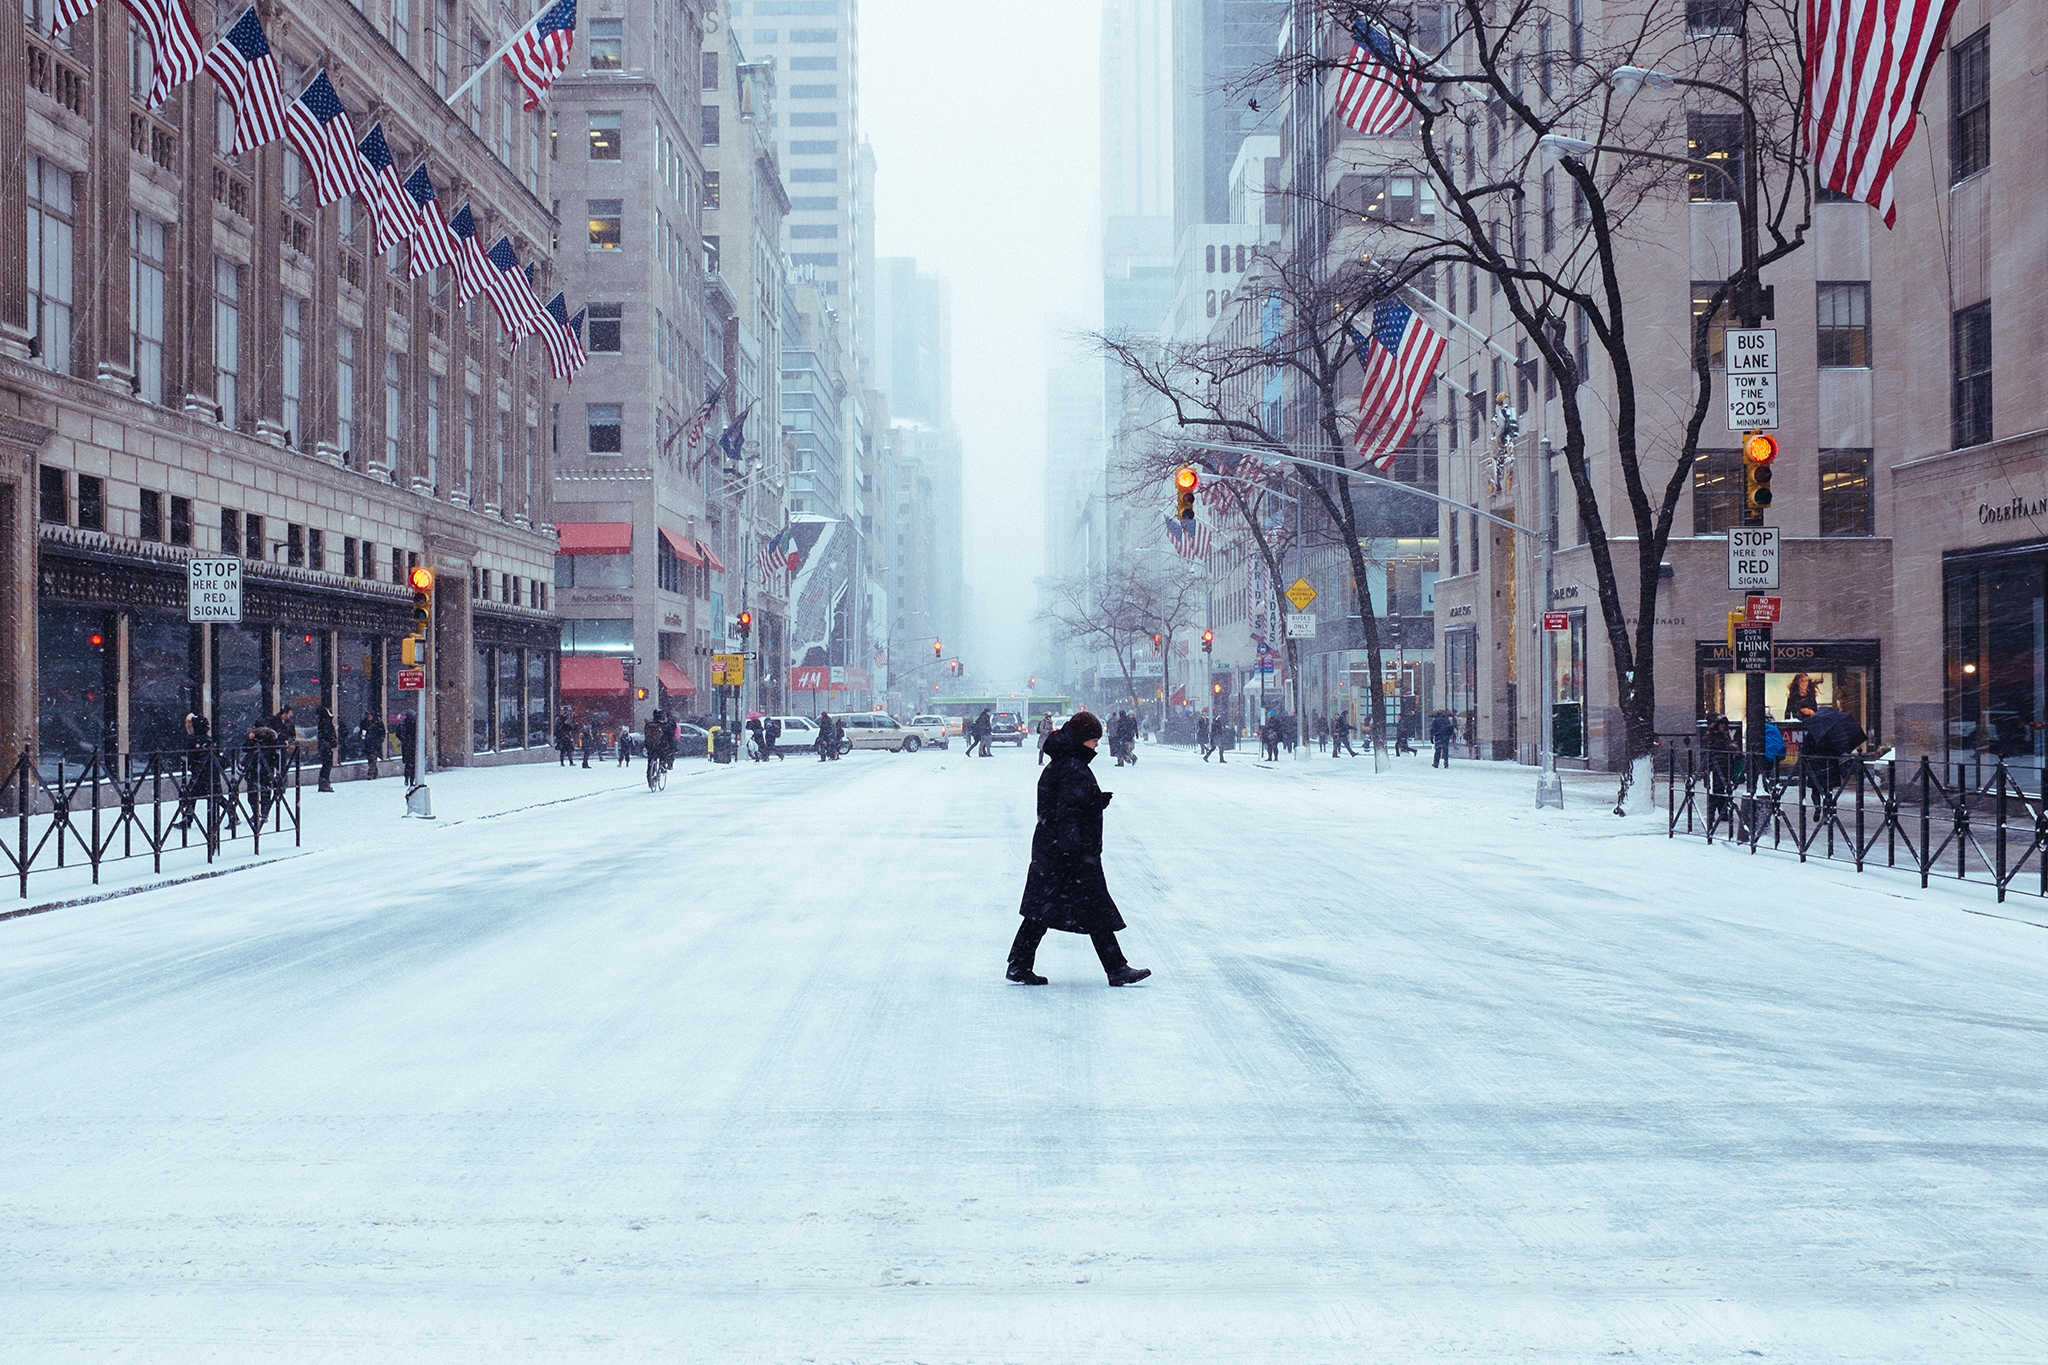 Best snow songs for weathering a winter storm